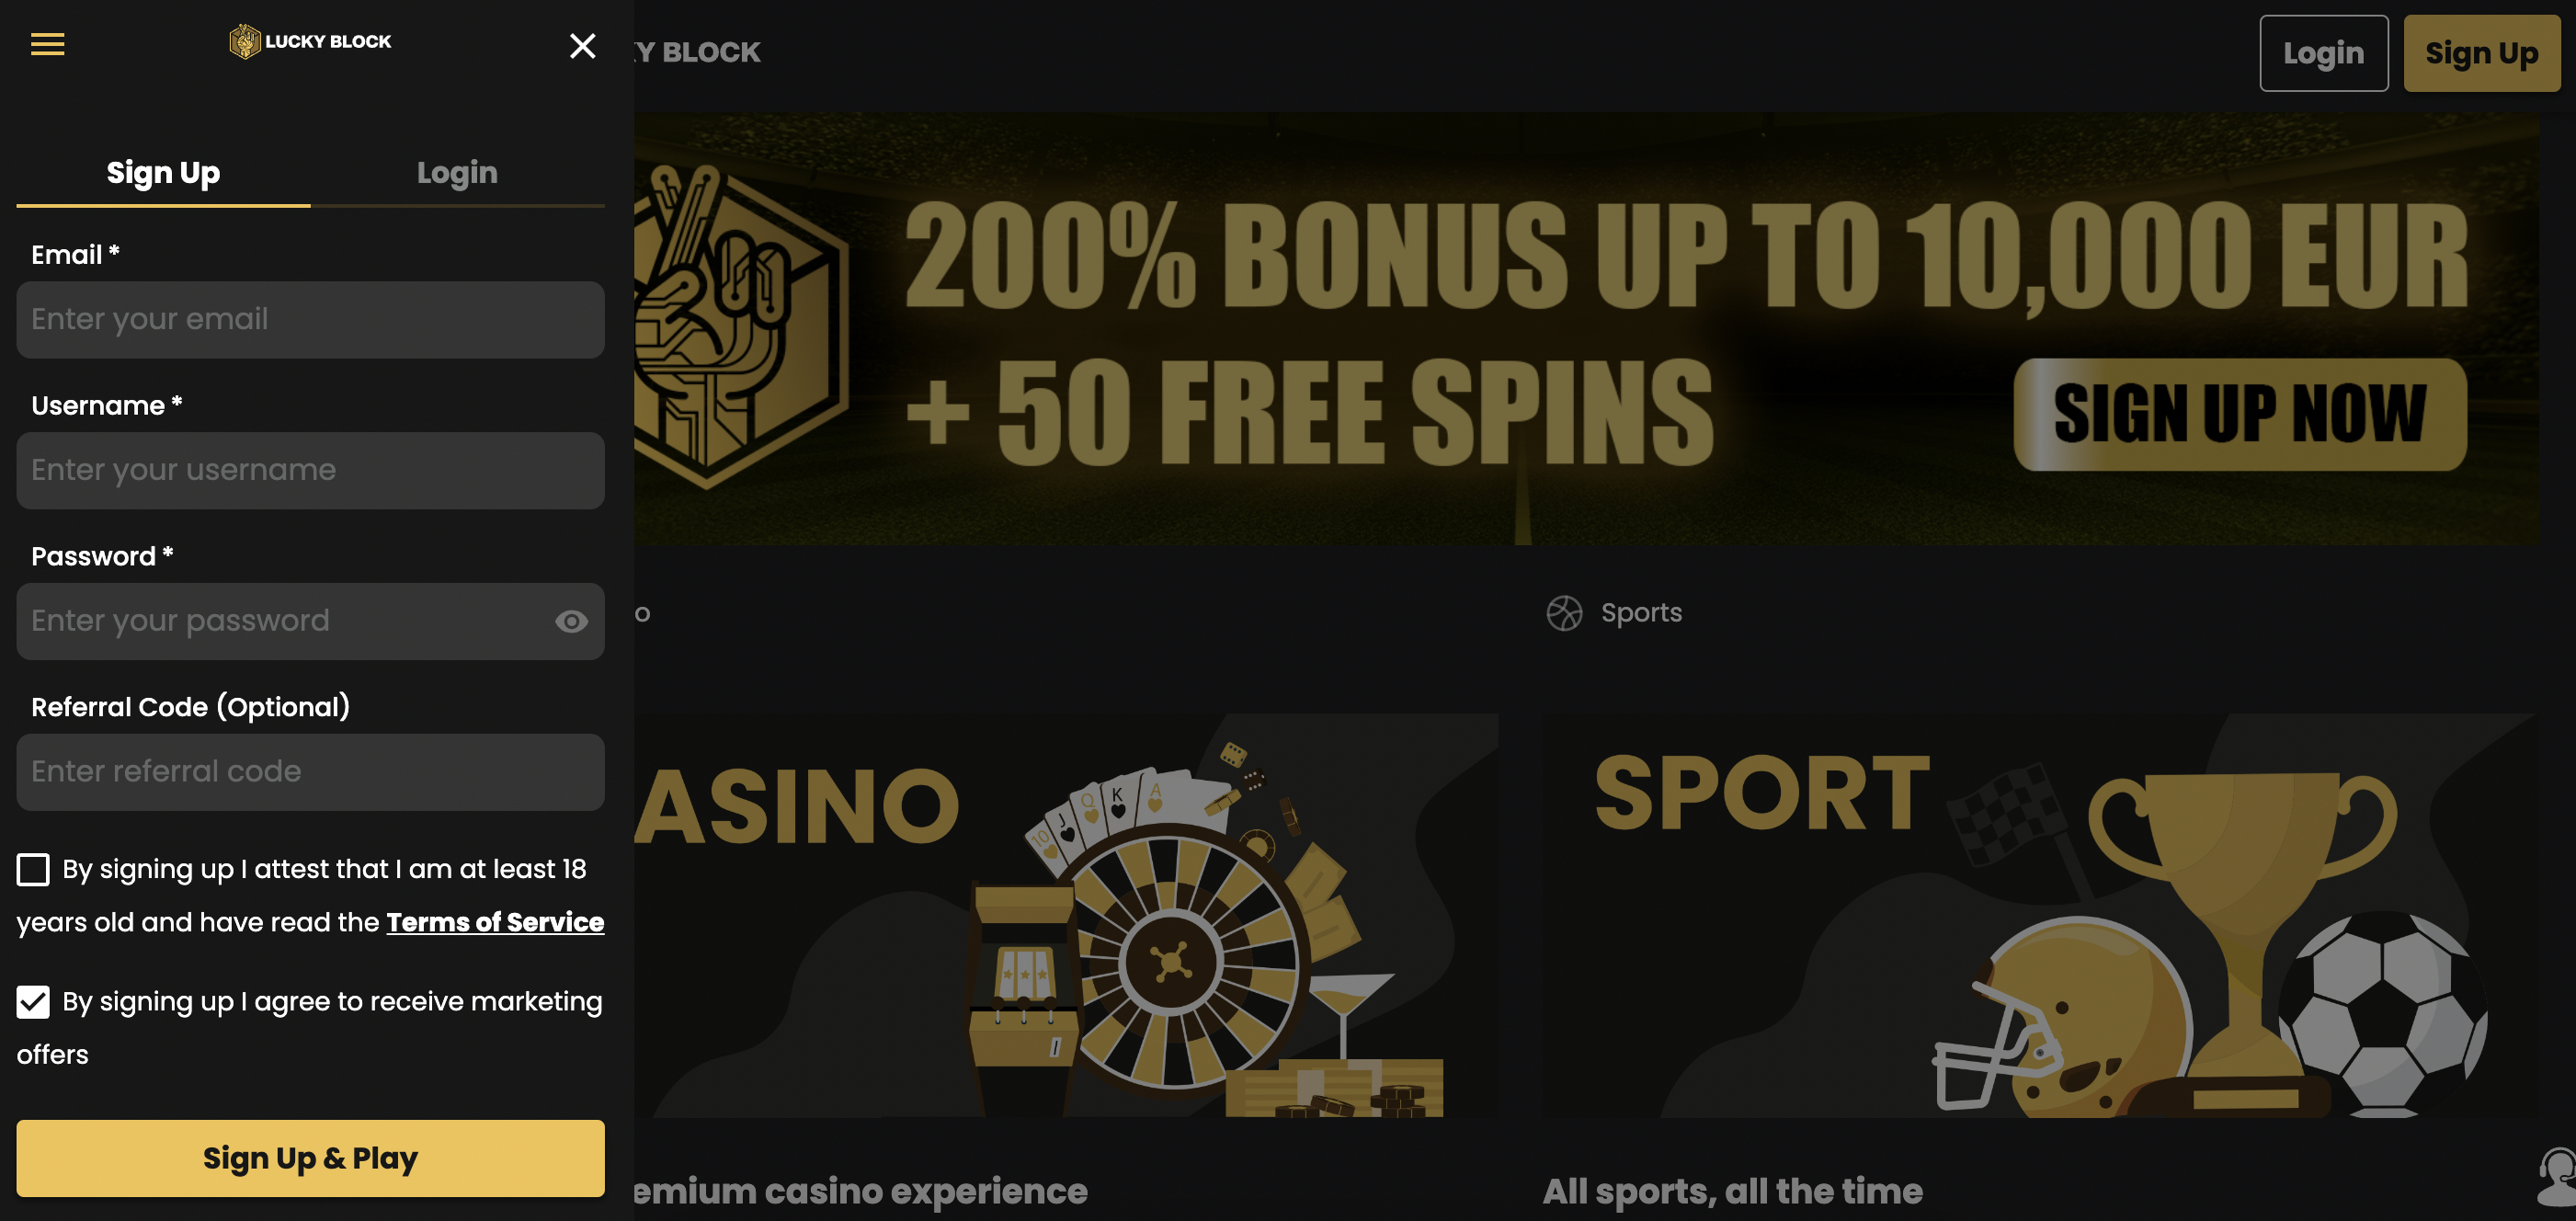 Lucky Block Casino Signup Page